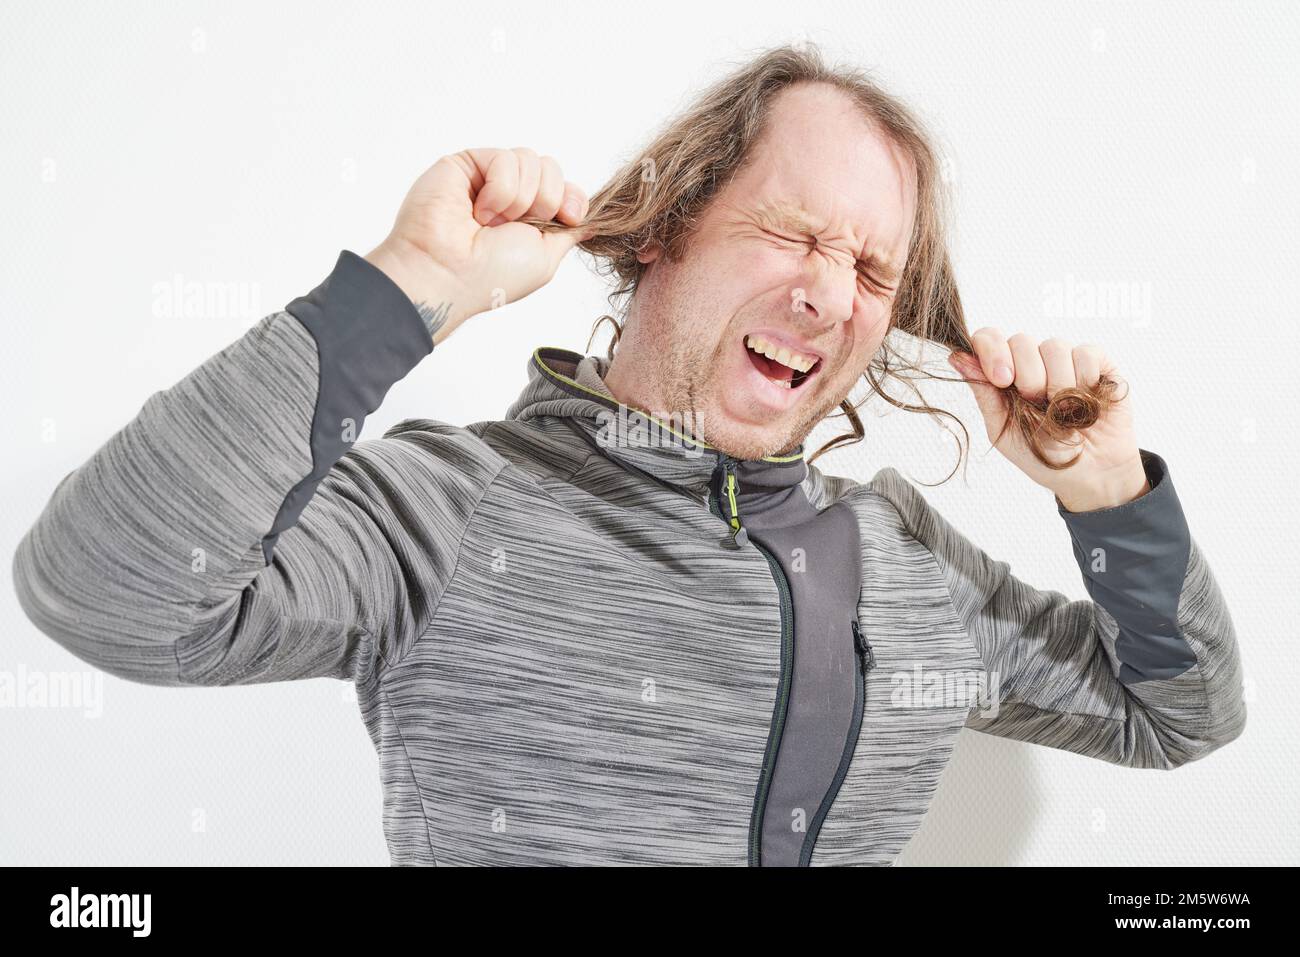 Man angry about his long hair Stock Photo